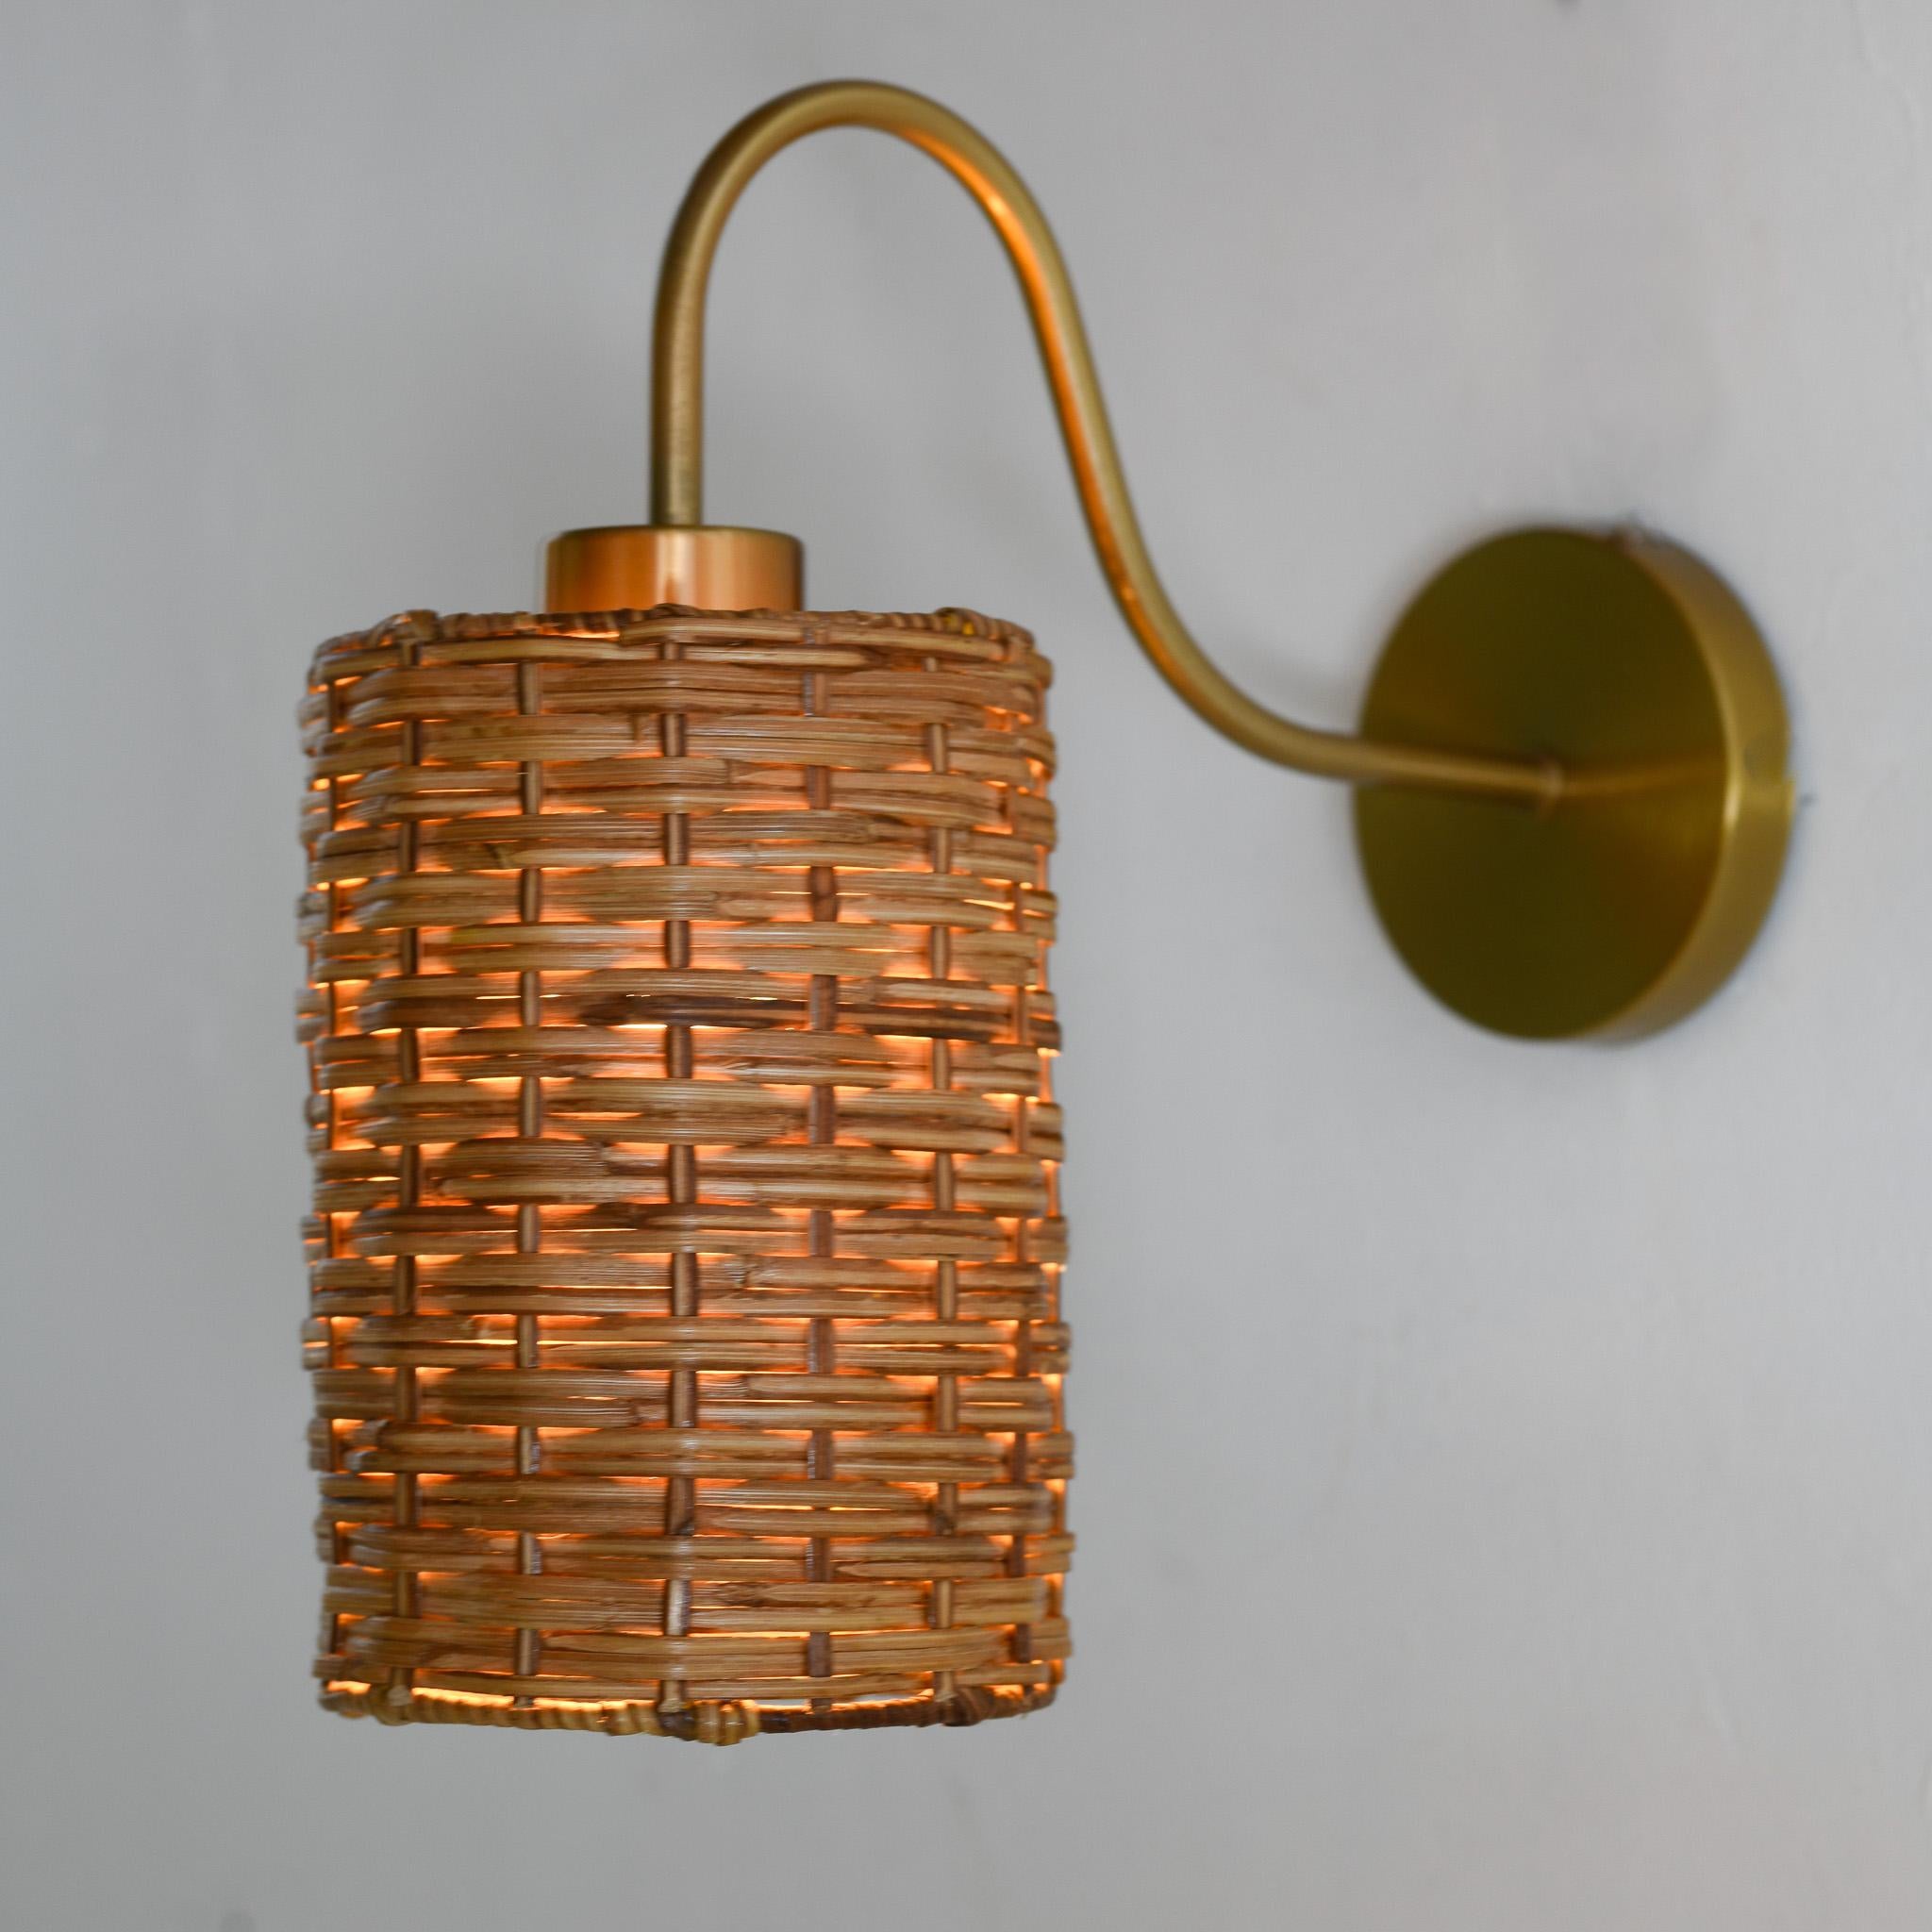 Illuminate your bathroom or bedroom with this eco-friendly wicker wall sconce lamp. Handcrafted with natural materials and adorned with a touch of gold, this modern light adds a luxurious touch to your decor. Elevate your space with this